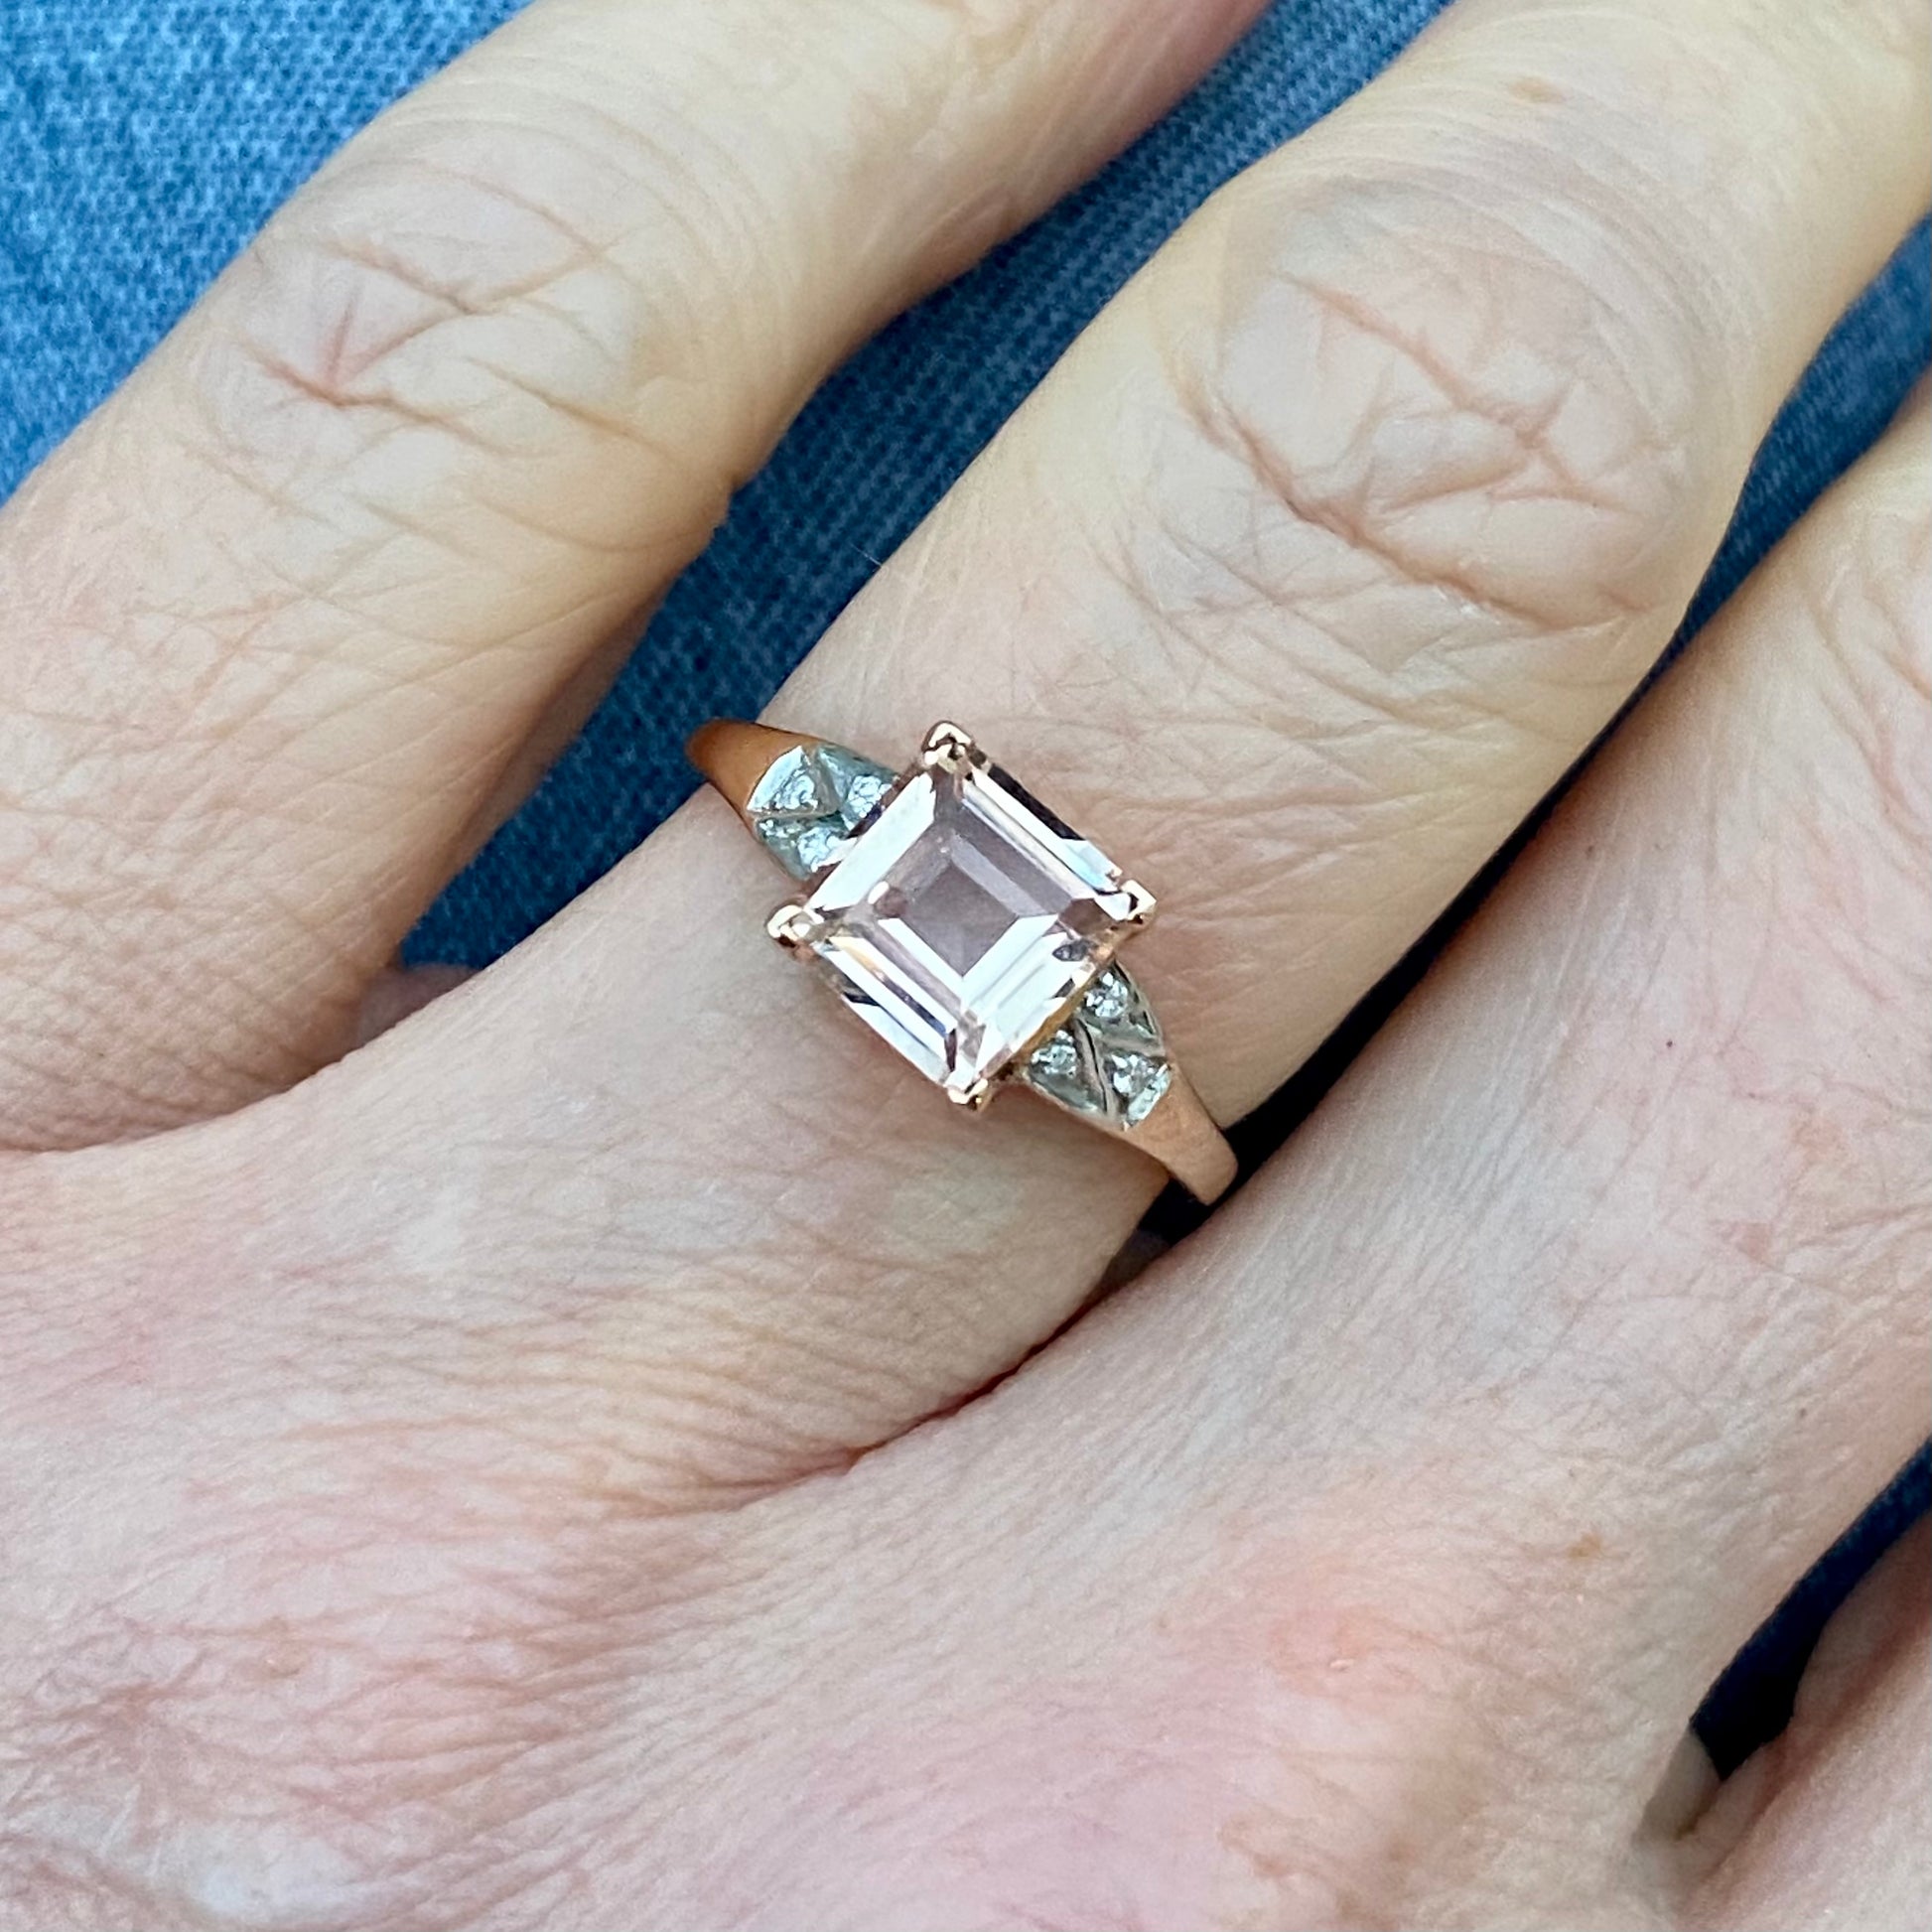 9ct Rose Gold Morganite & Diamond Ring Size O  Trilogy of Diamonds in the shoulders